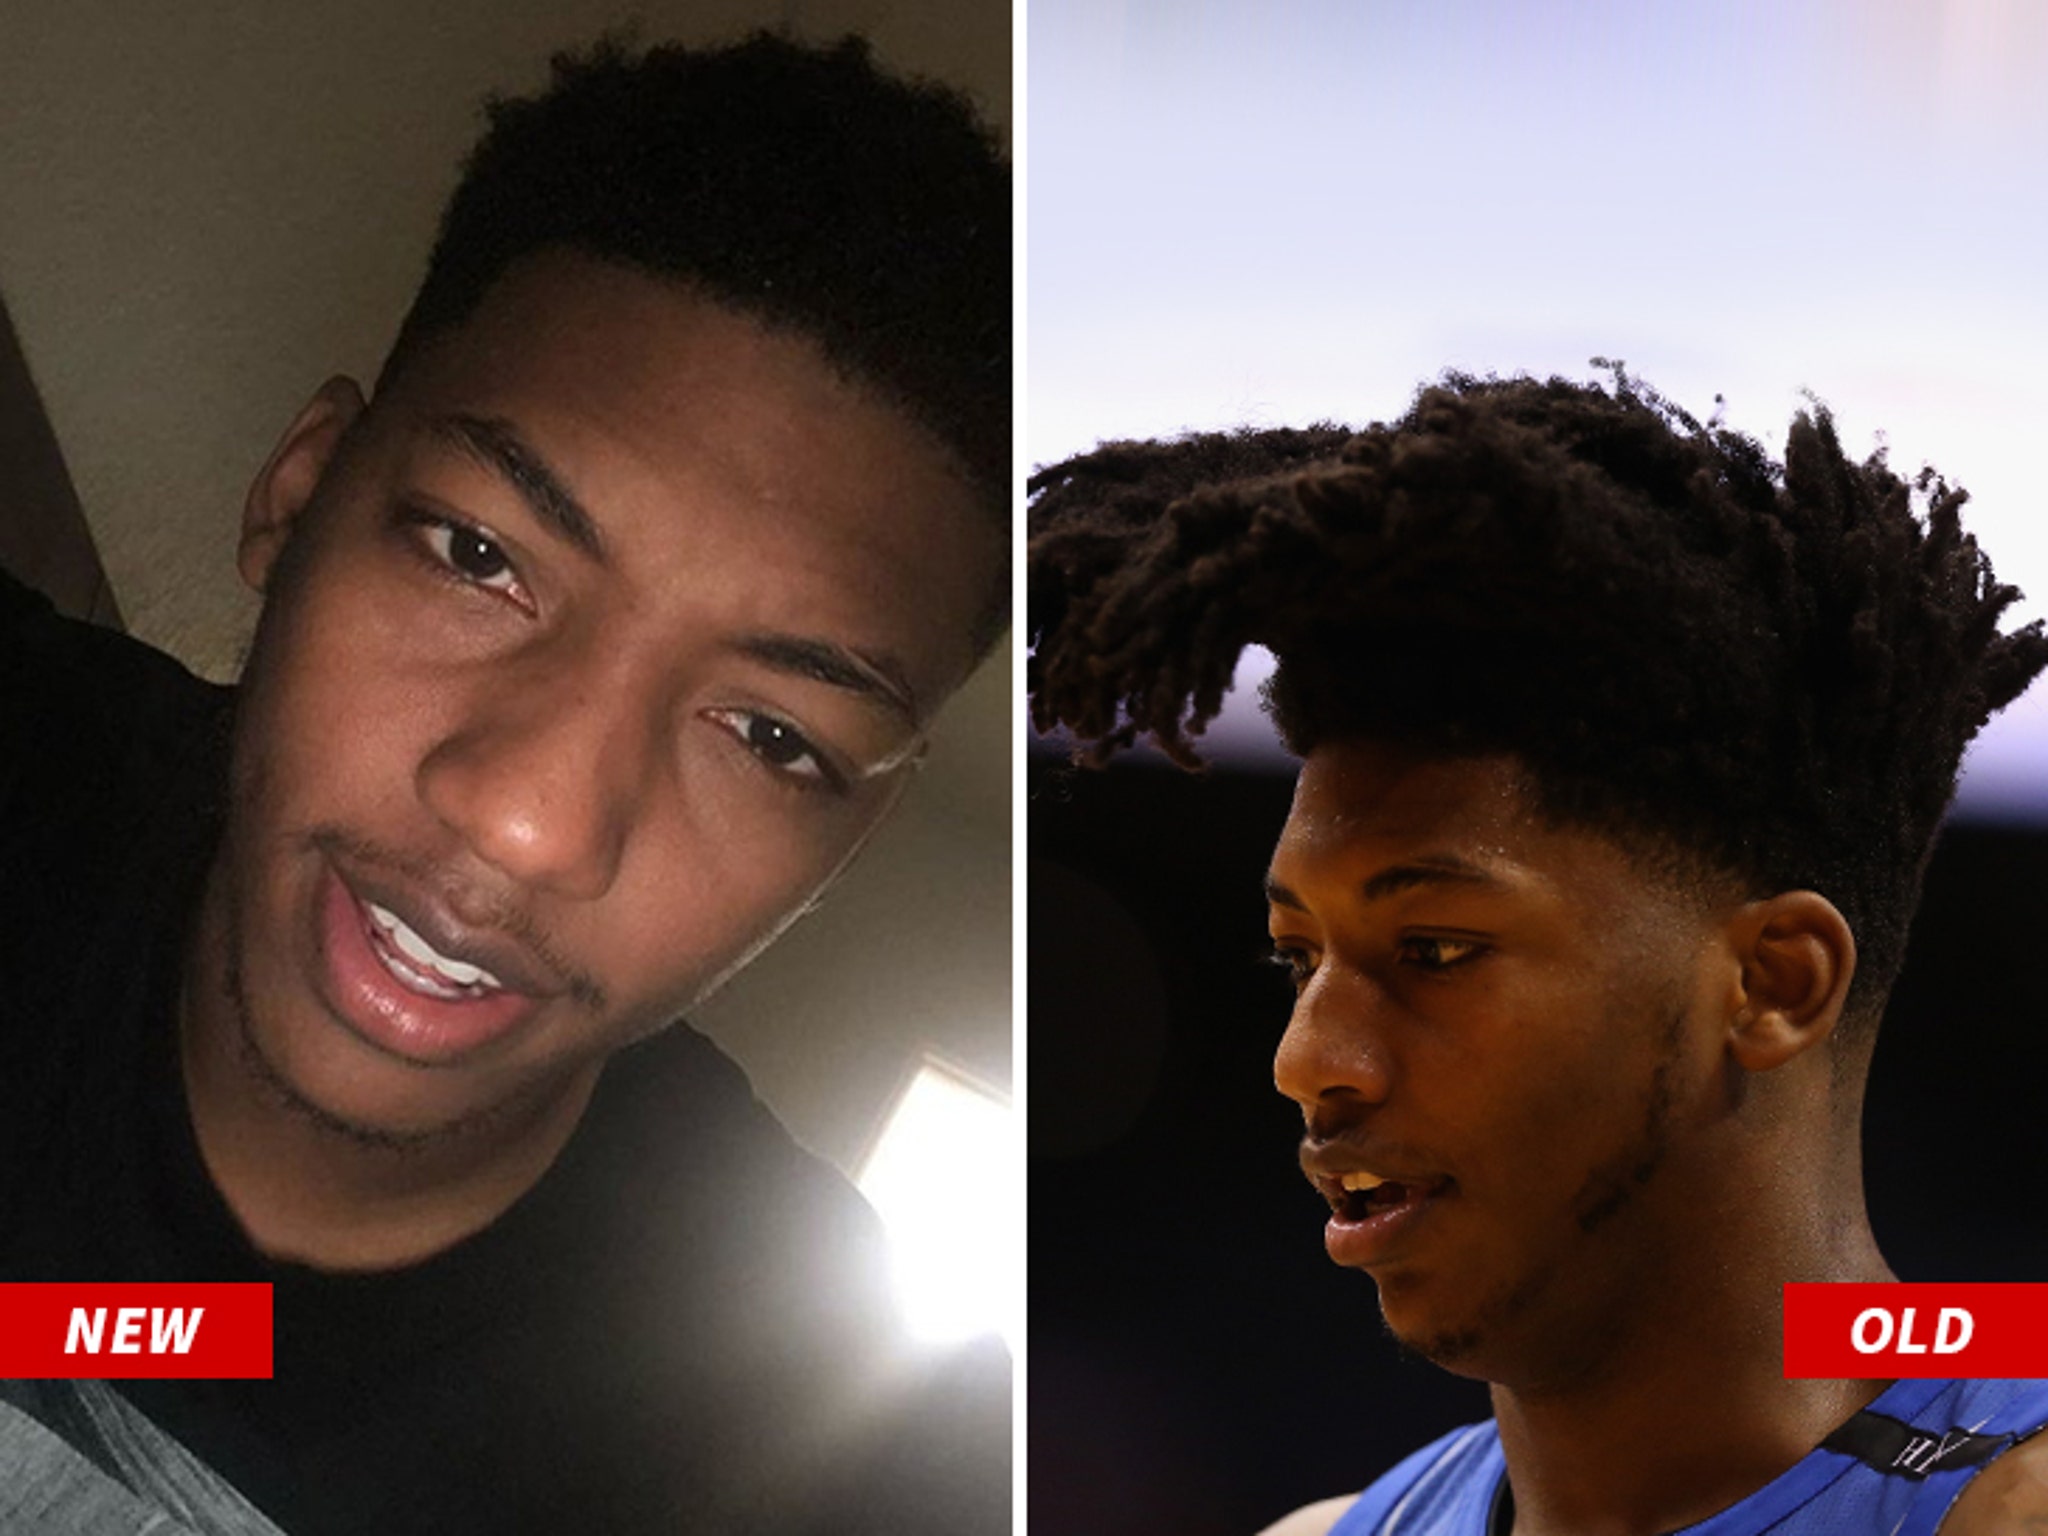 NBA's Elfrid Payton Reveals New Look After Chopping Signature Haircut